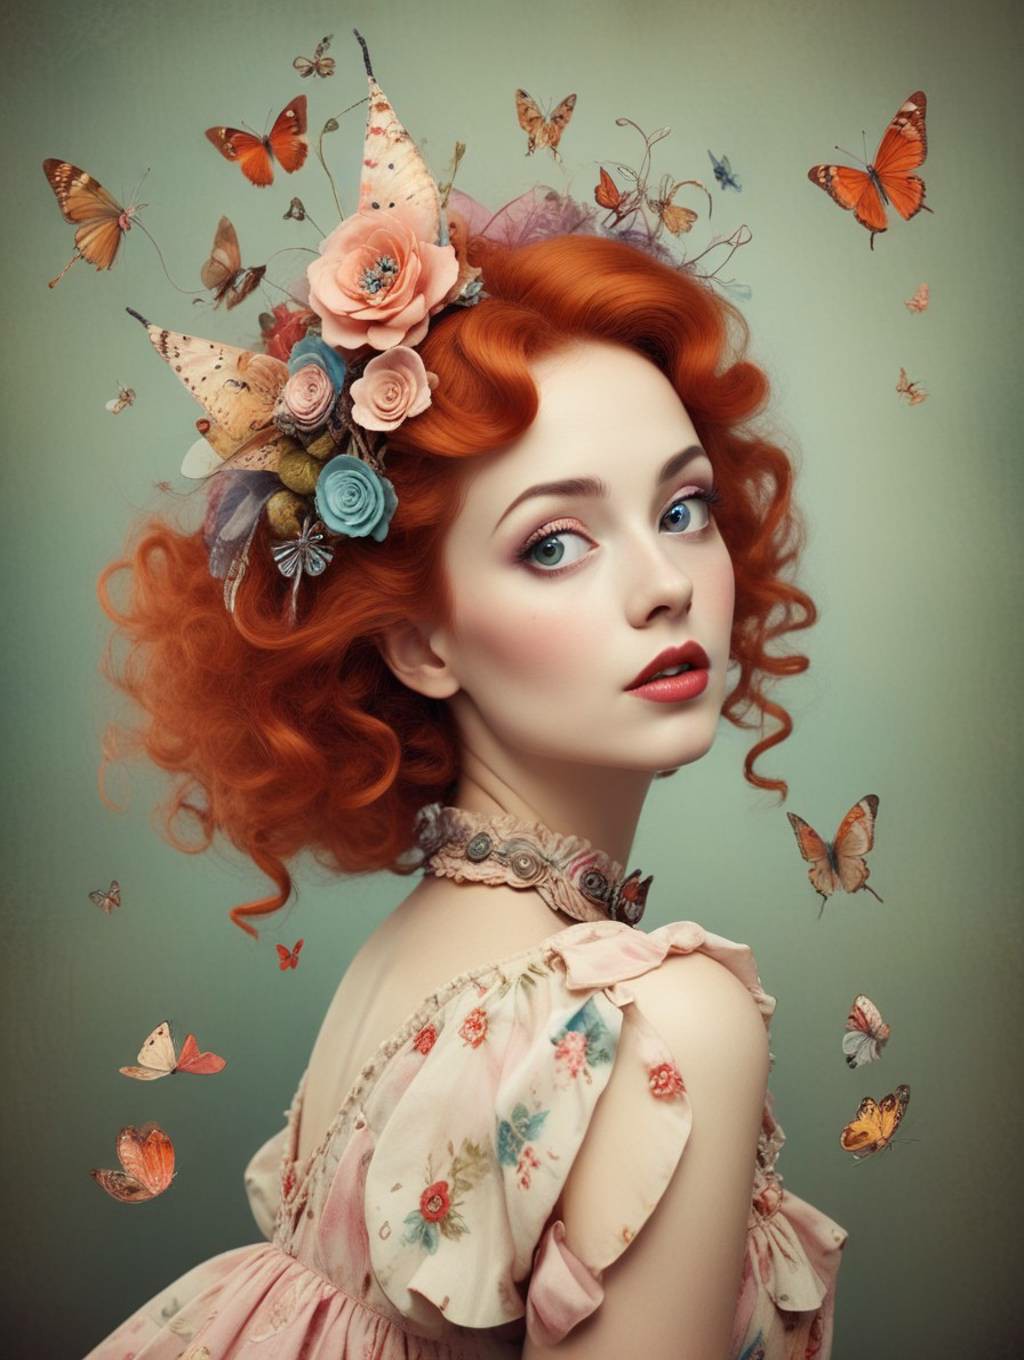 Whimsical & Quirky Women: Art Frames & Portrait Photography-Theme:2